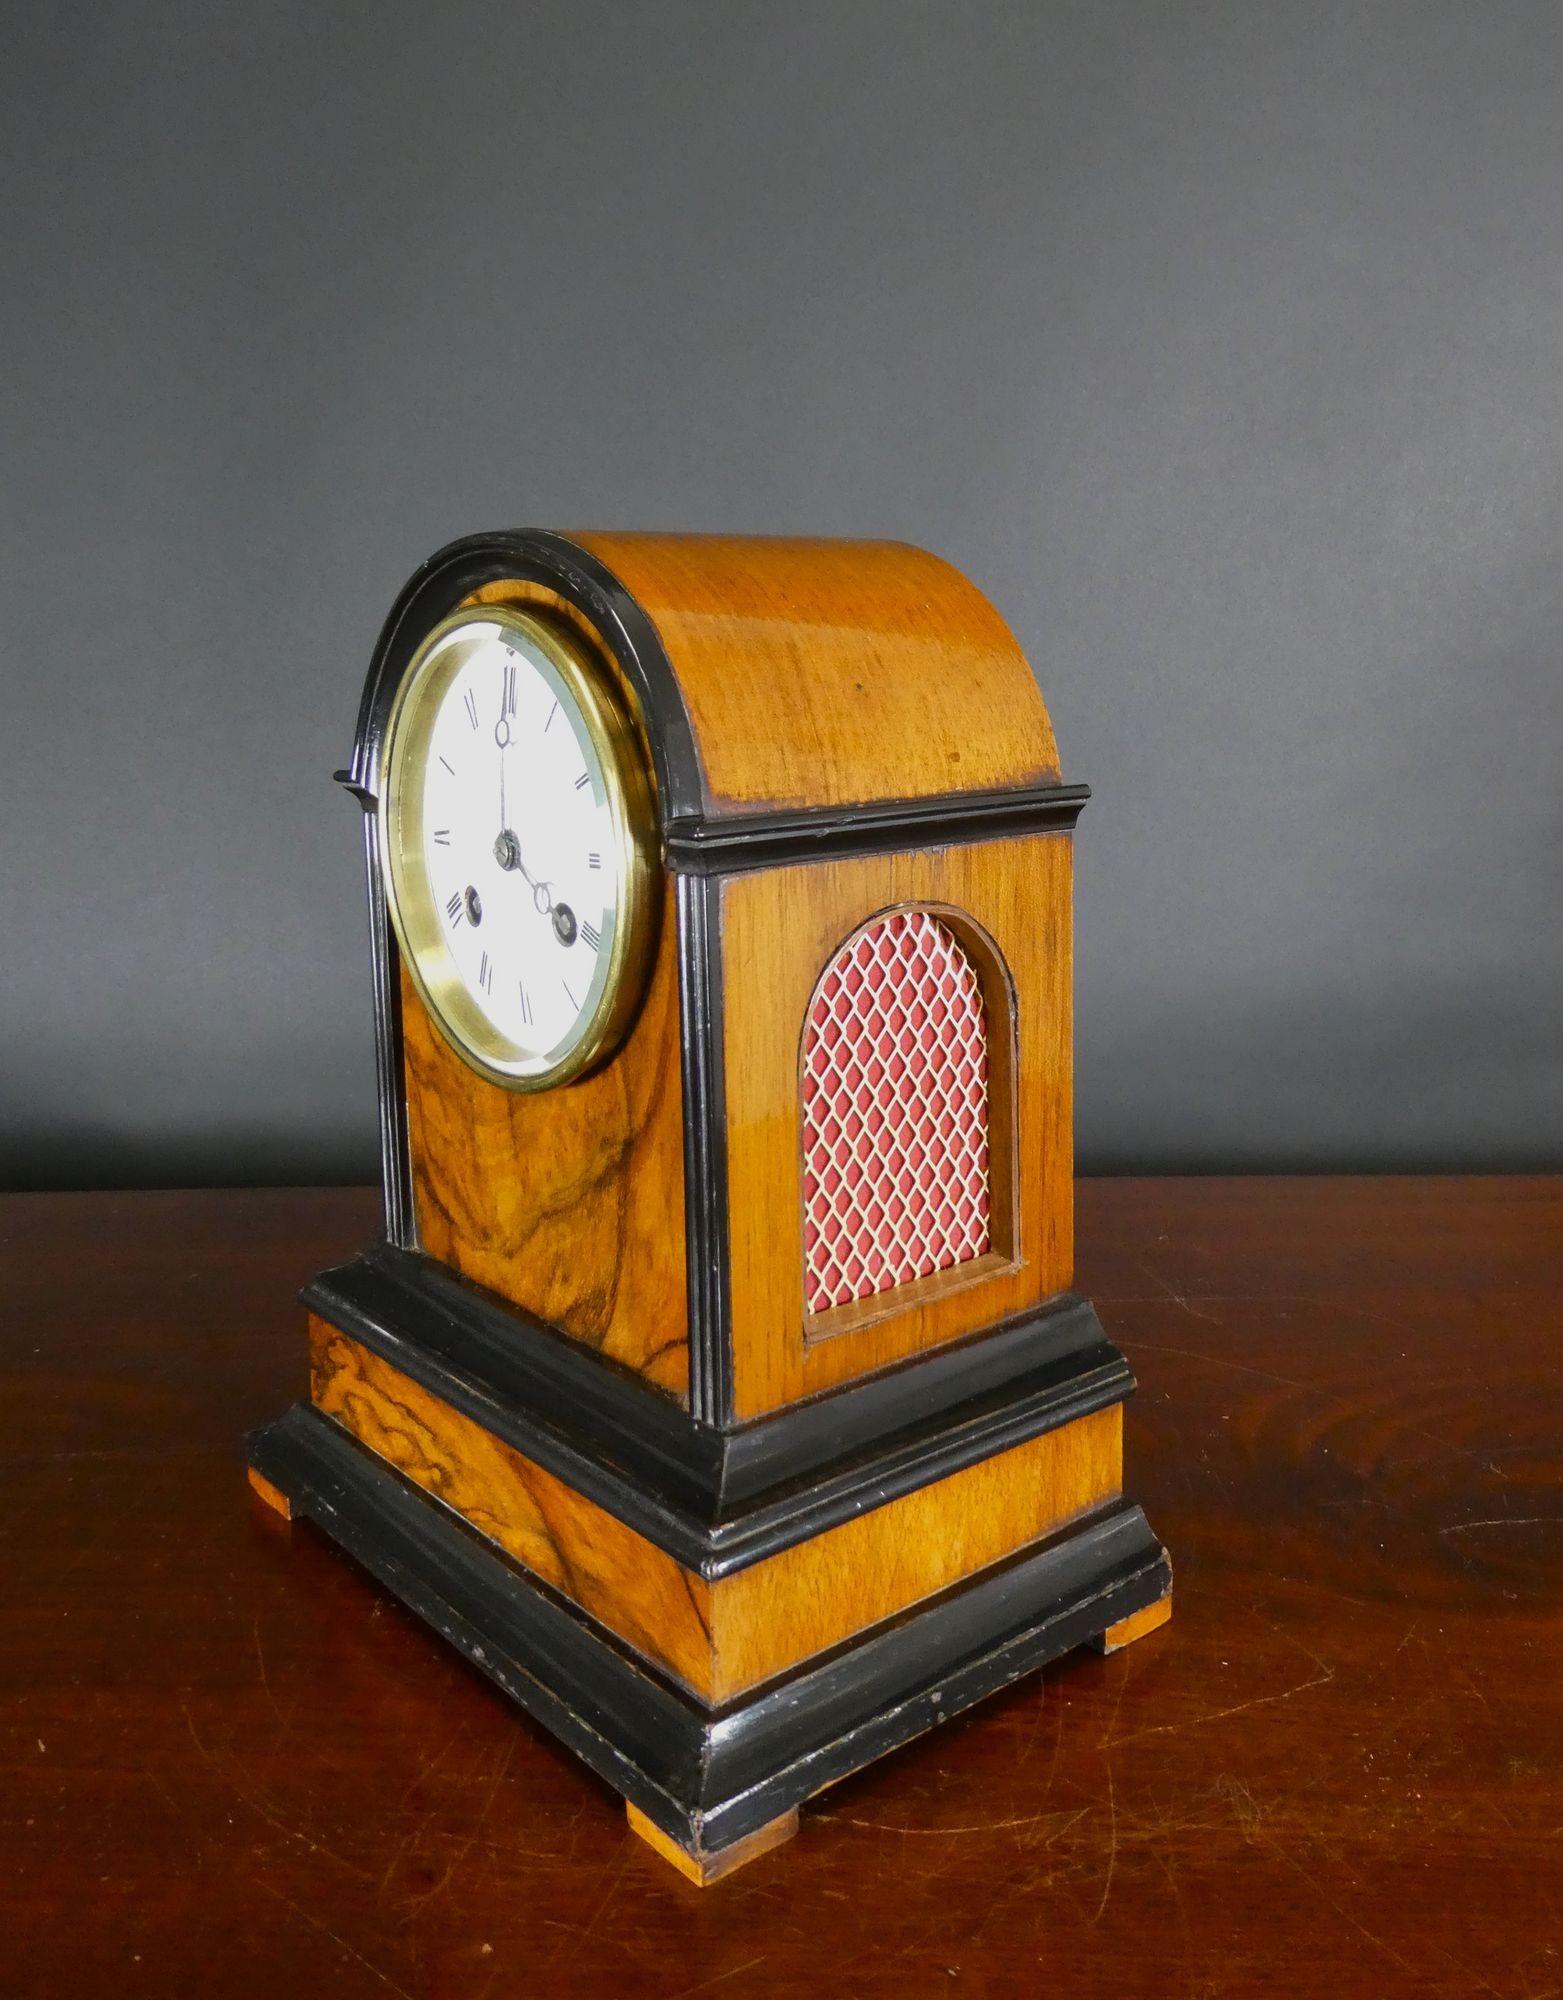 Victorian walnut cased mantle clock with break arch top and ebonised mouldings resting on a stepped plinth with pad feet. Decorative side silk lined sound frets.
Enamel dial with Roman numerals and original ‘blued’ steel Moonpoise hands.
French